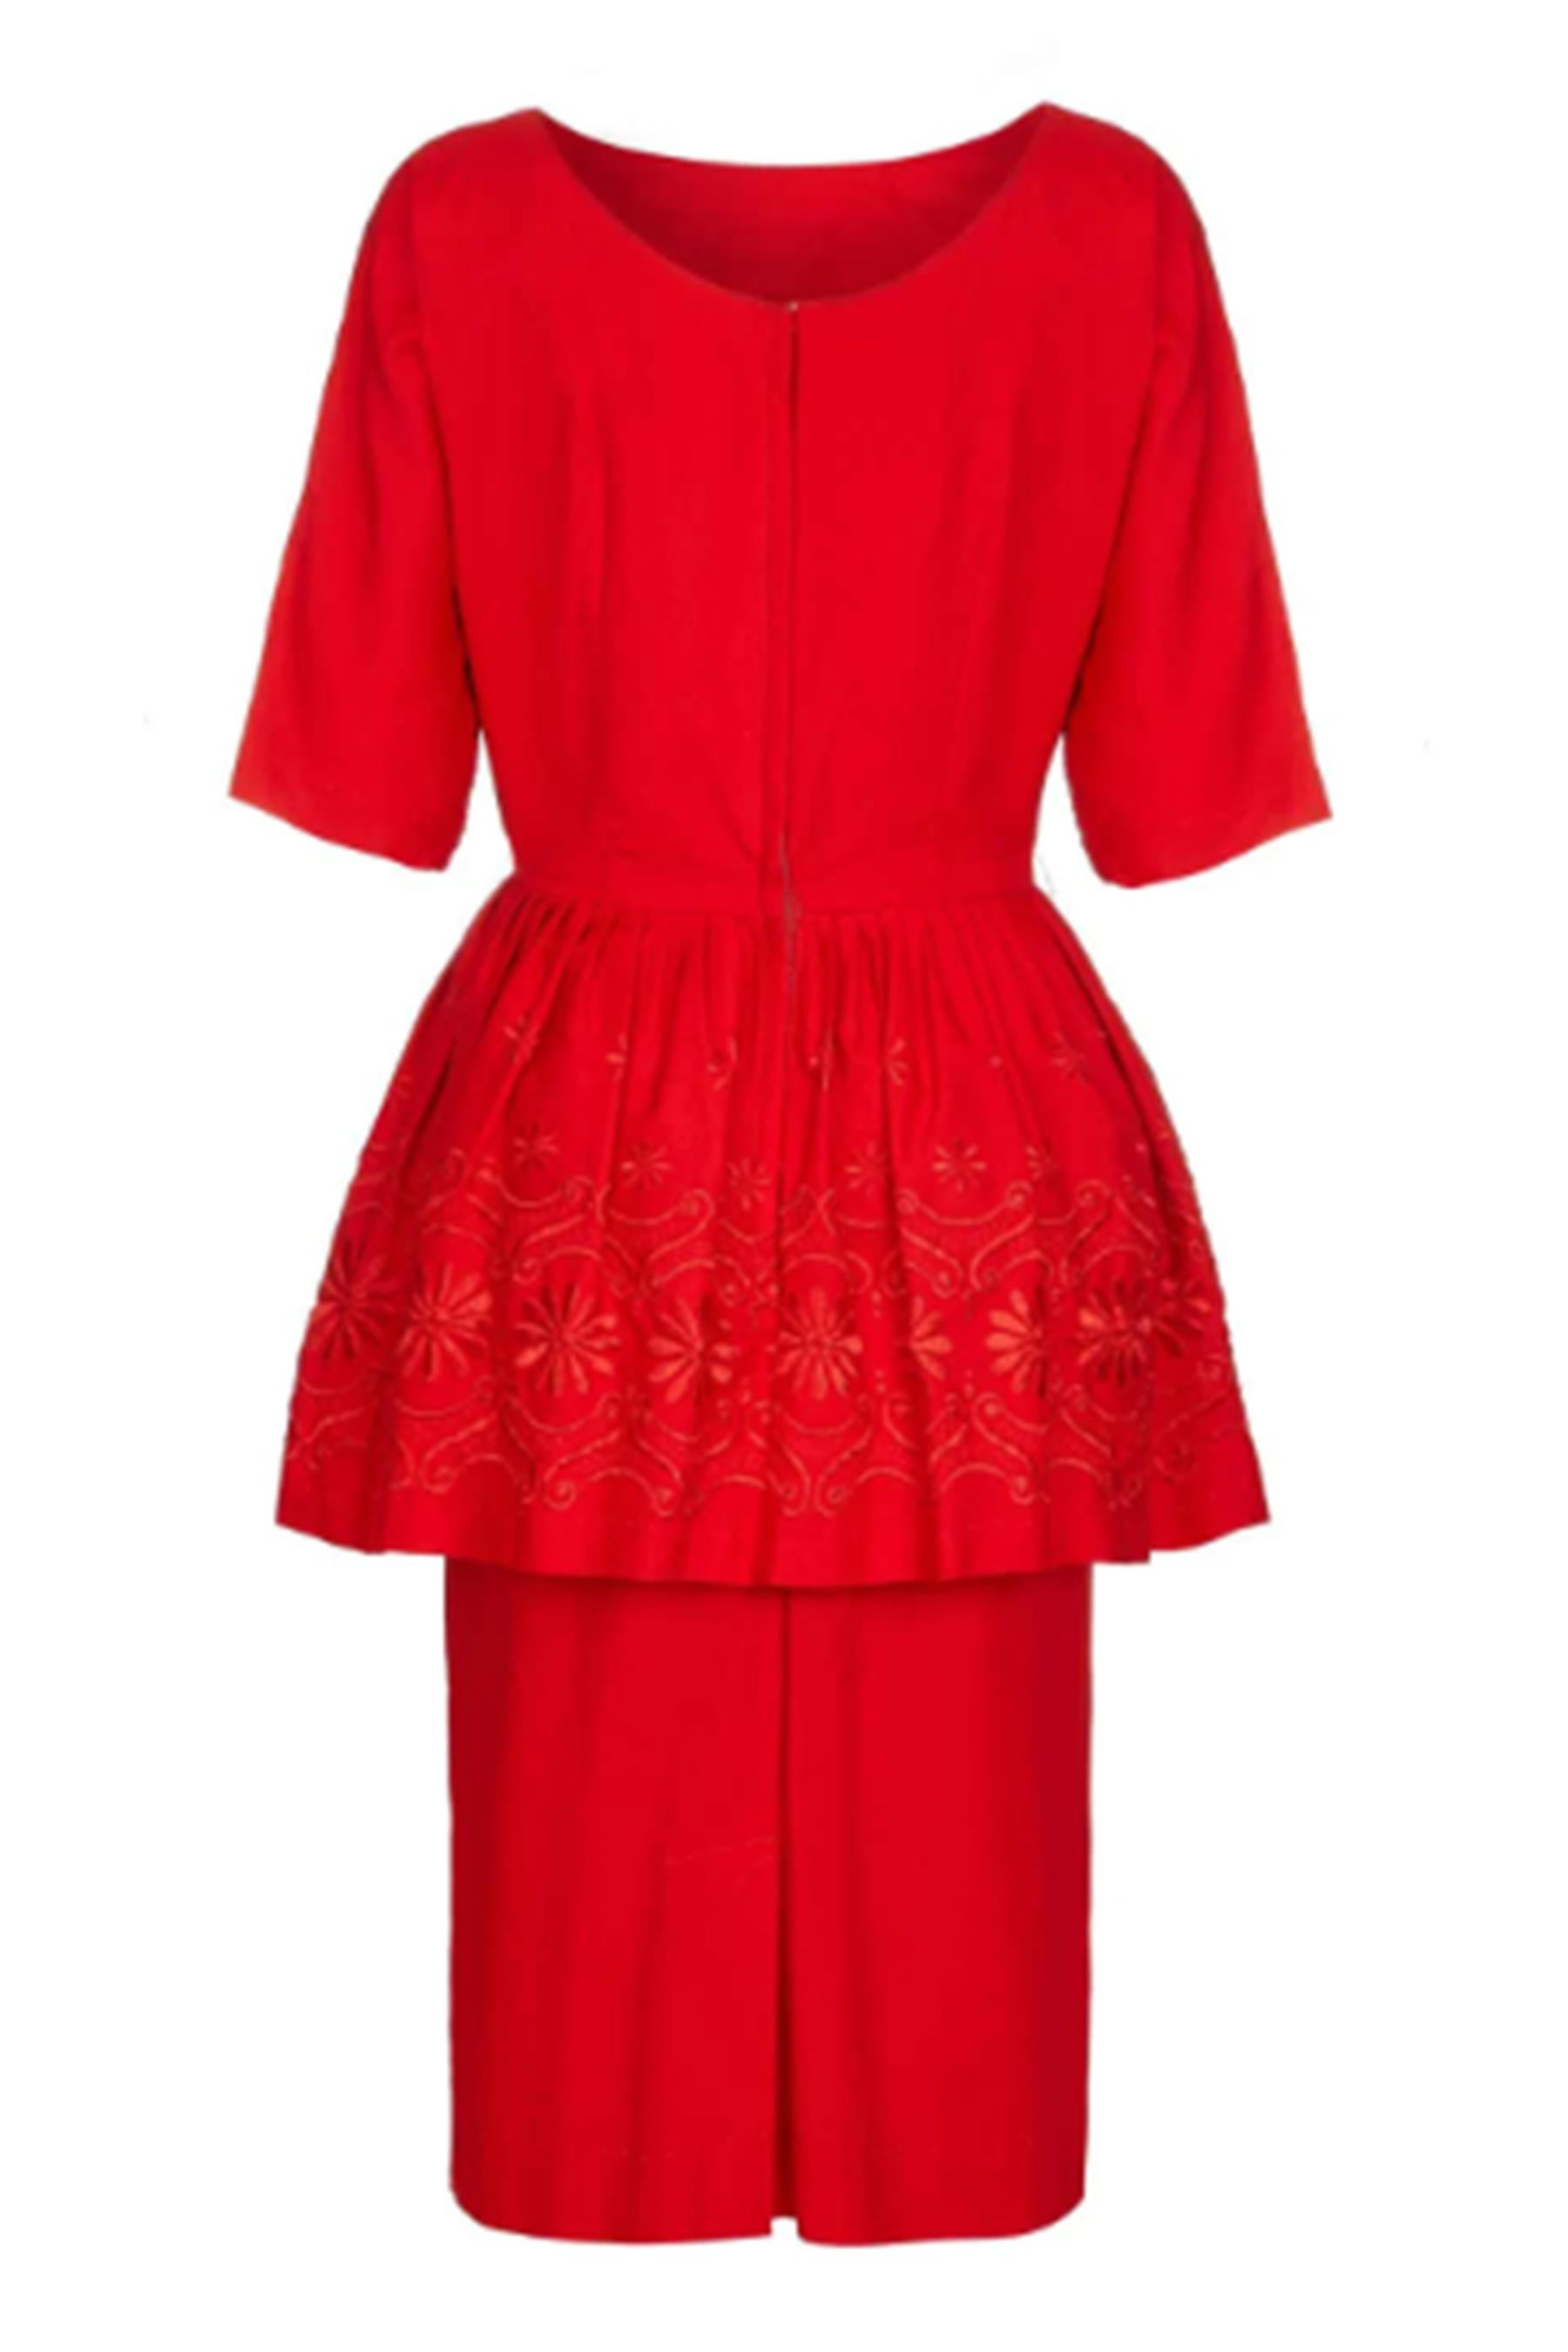 1950s Red Cotton Dress with Embroidered Peplum In Excellent Condition For Sale In London, GB